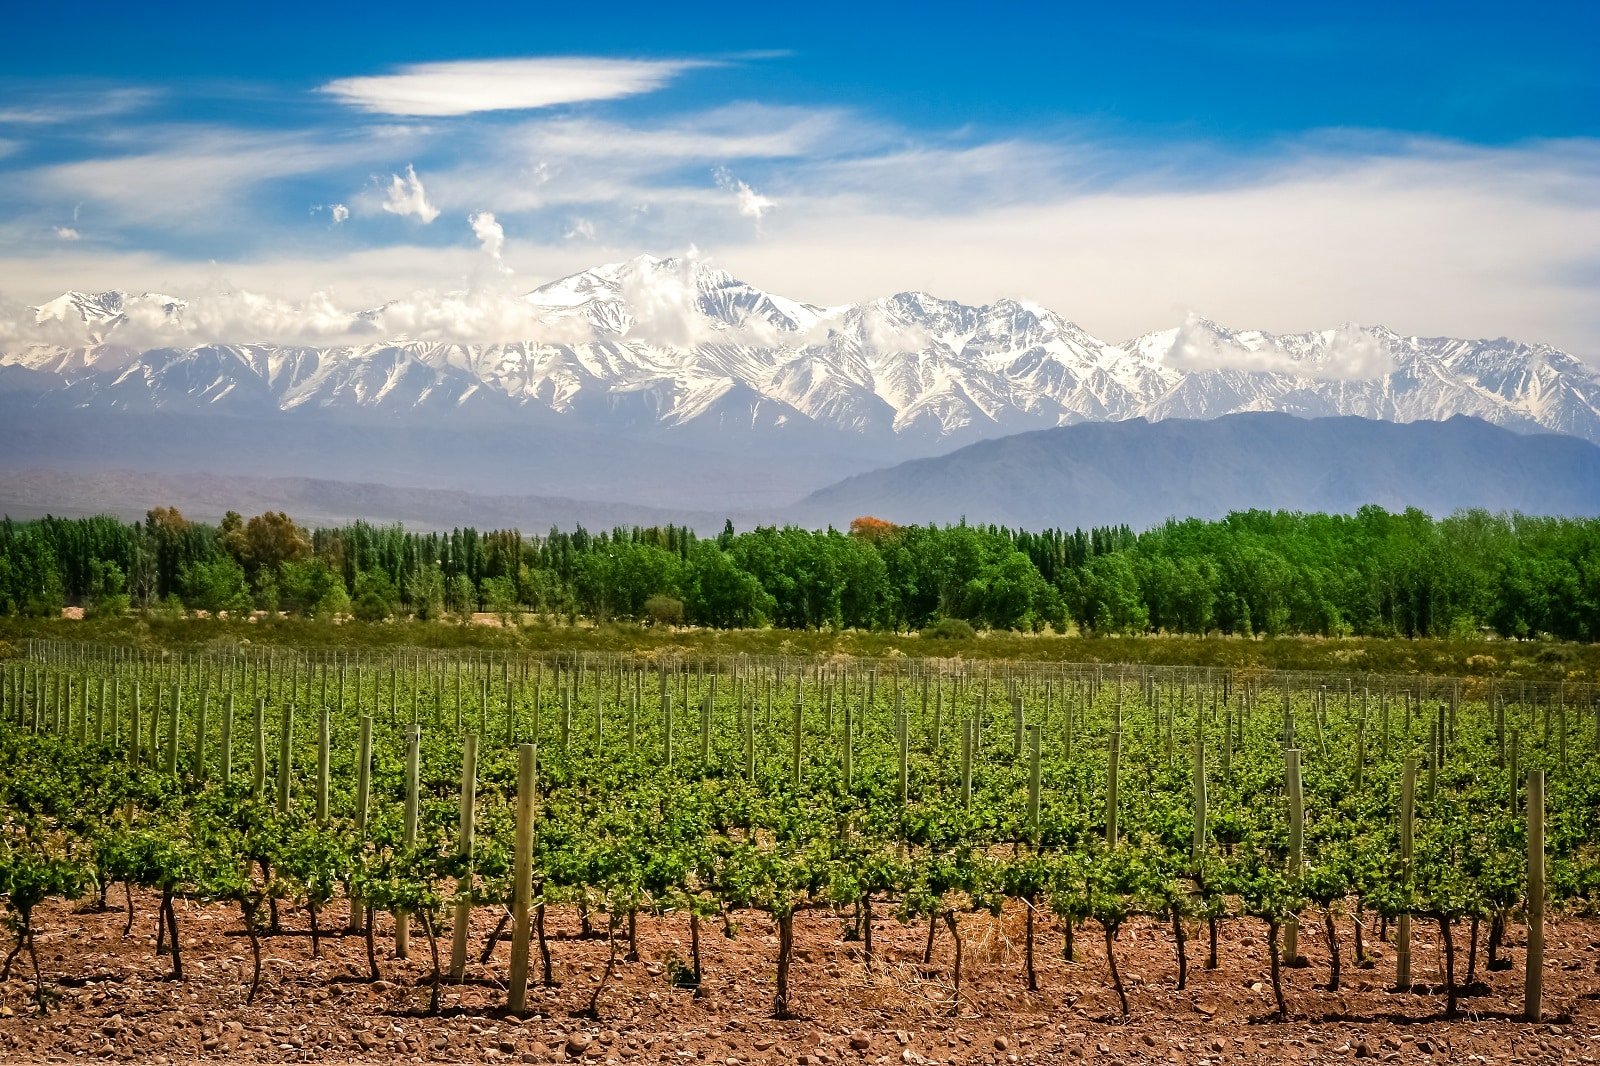 <p><span>You’ll find Mendoza, the epicenter of Argentina’s wine country, in a region synonymous with the celebrated Malbec grape. This area is not just about exceptional winemaking; it’s a place where the stunning natural environment enhances the entire experience. Situated at the foothills of the Andes, Mendoza provides a dramatic backdrop to your wine-tasting journey.</span></p> <p><span>The towering mountains contribute to the region’s unique terroir and offer a range of outdoor adventures. From hiking and mountain biking to simply enjoying the panoramic views, Mendoza combines the pleasures of wine with the thrill of adventure. Here, you can savor some of the world’s best Malbecs while immersing yourself in a landscape that is as bold and robust as the wines it produces.</span></p> <p><b>Insider’s Tip: </b><span>Visit during the Vendimia Festival to see the region’s wine culture celebrated.</span></p> <p><b>When To Travel: </b><span>March to May for the grape harvest and autumn colors.</span></p> <p><b>How To Get There: </b><span>Fly into Mendoza International Airport.</span></p>